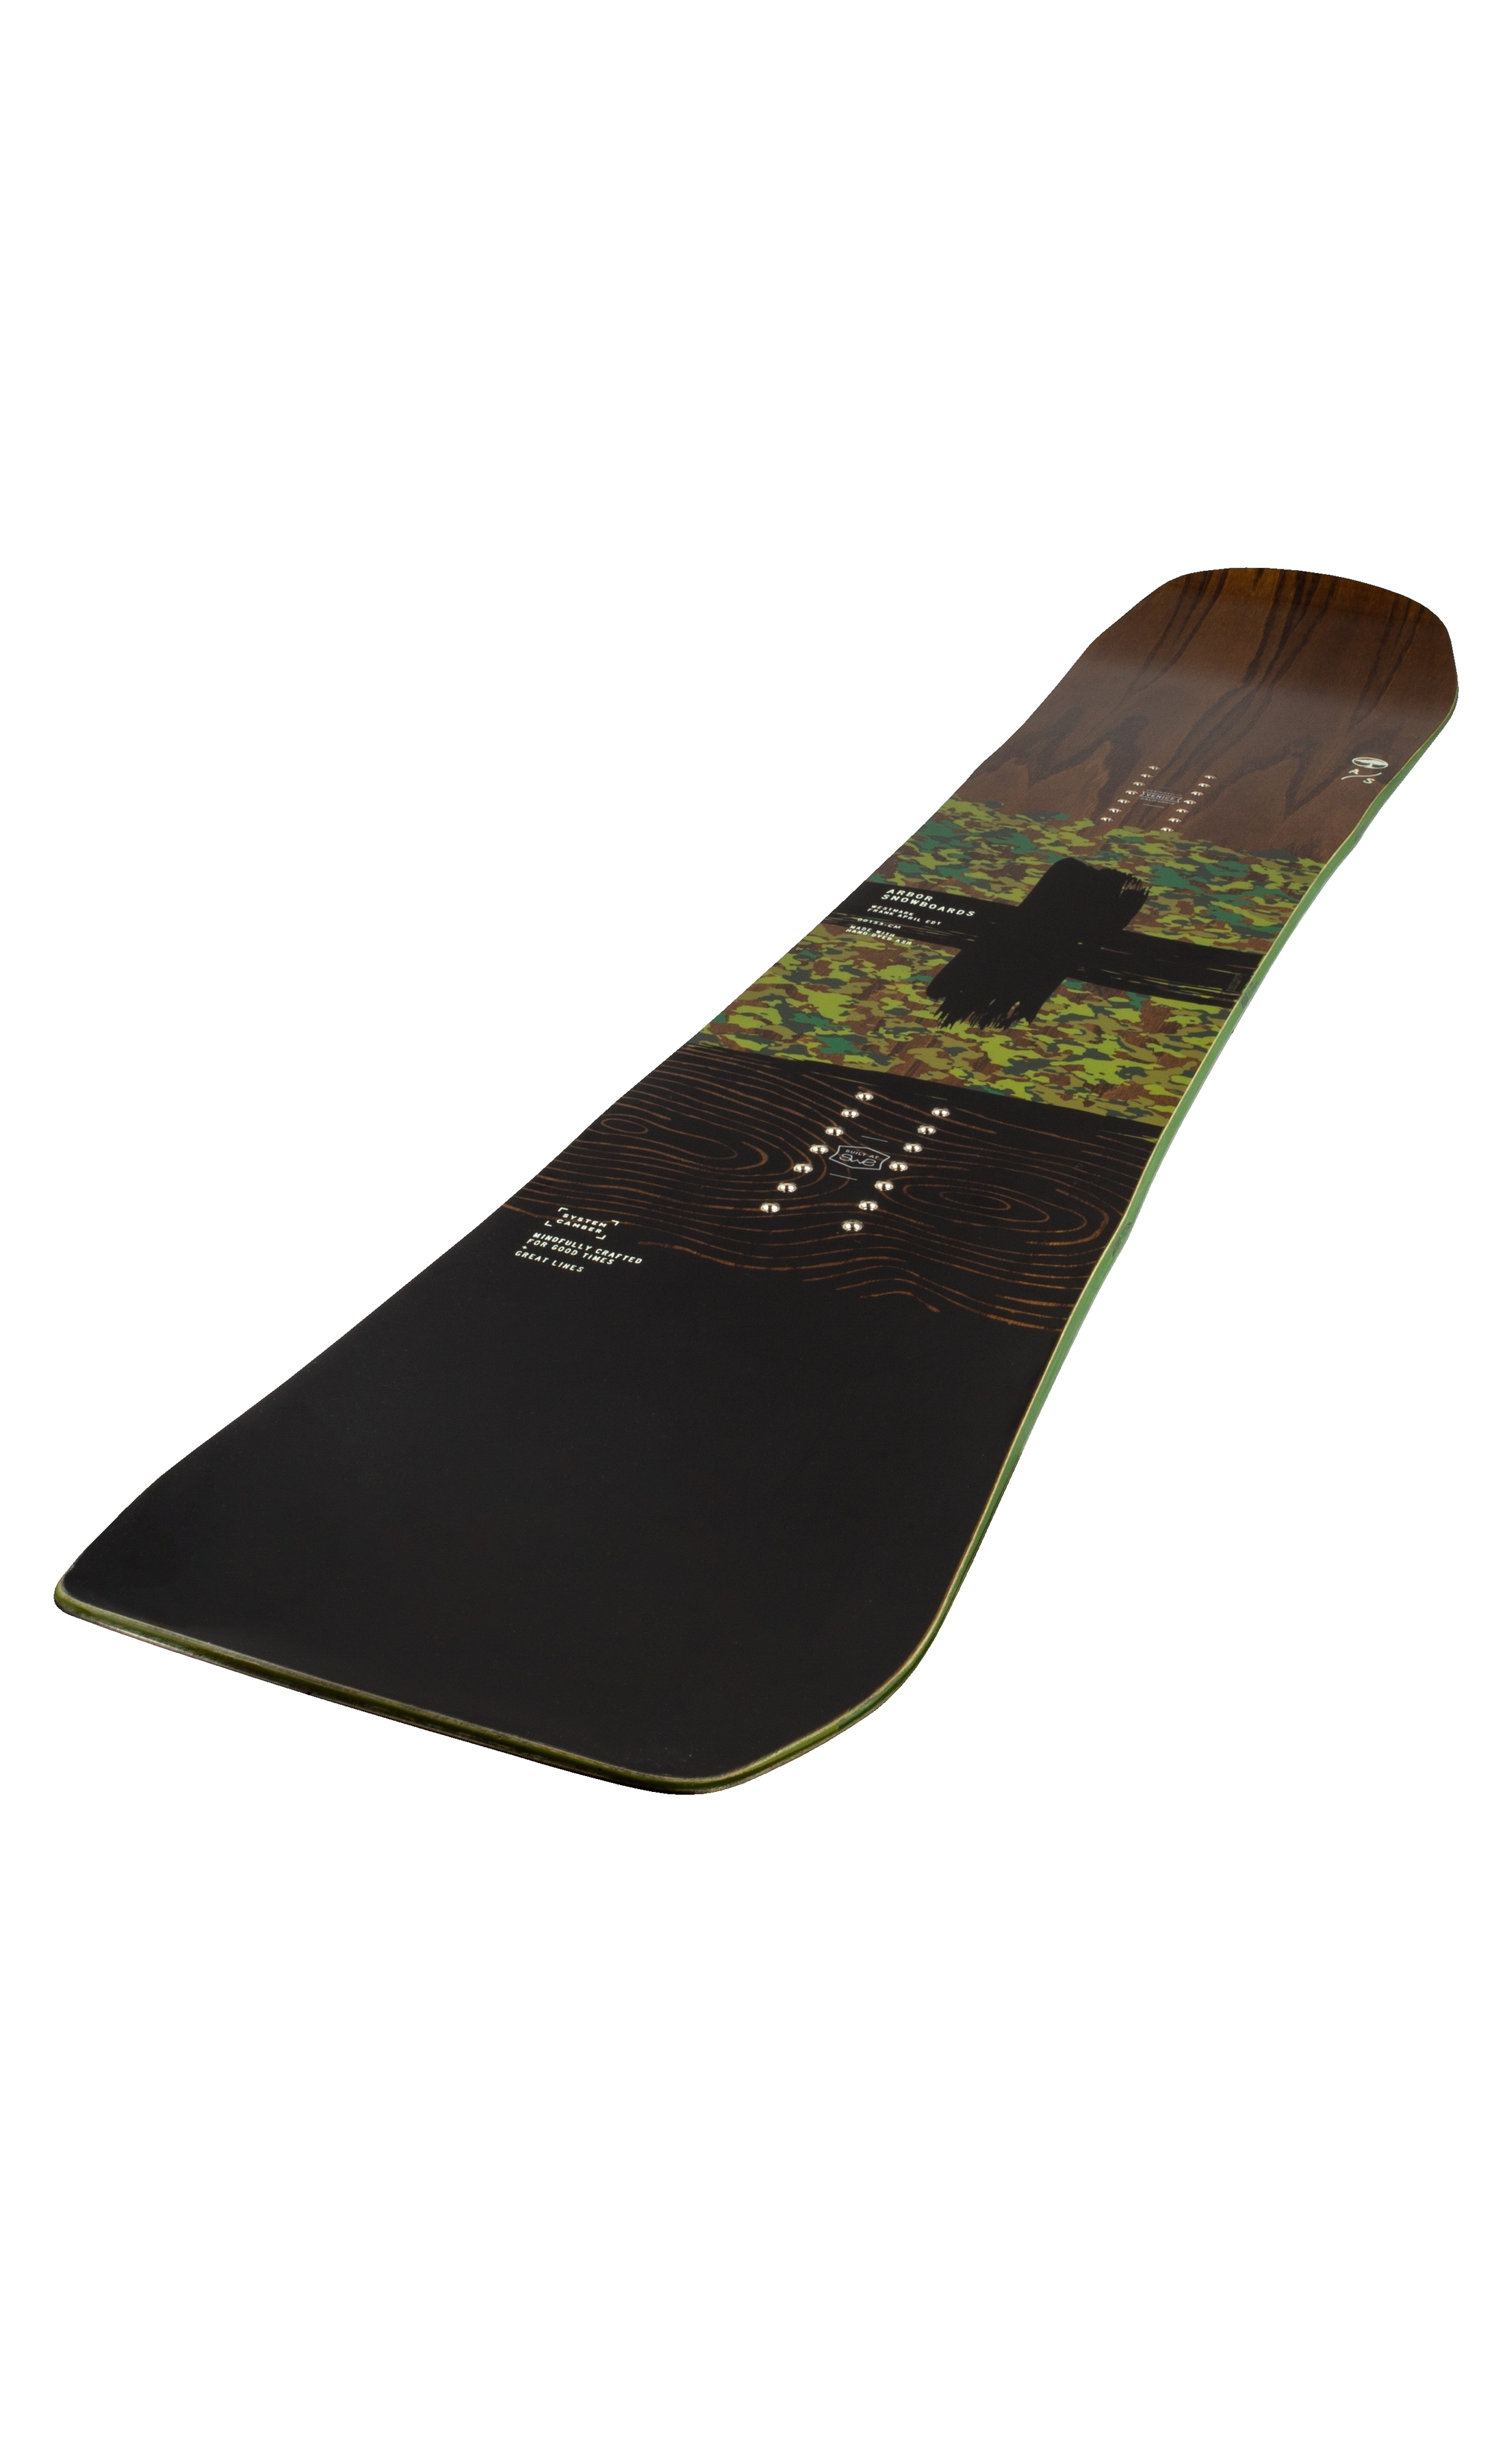 Method Mag The 2020 Arbor Westmark Camber 'Frank April Edt.' Snowboard